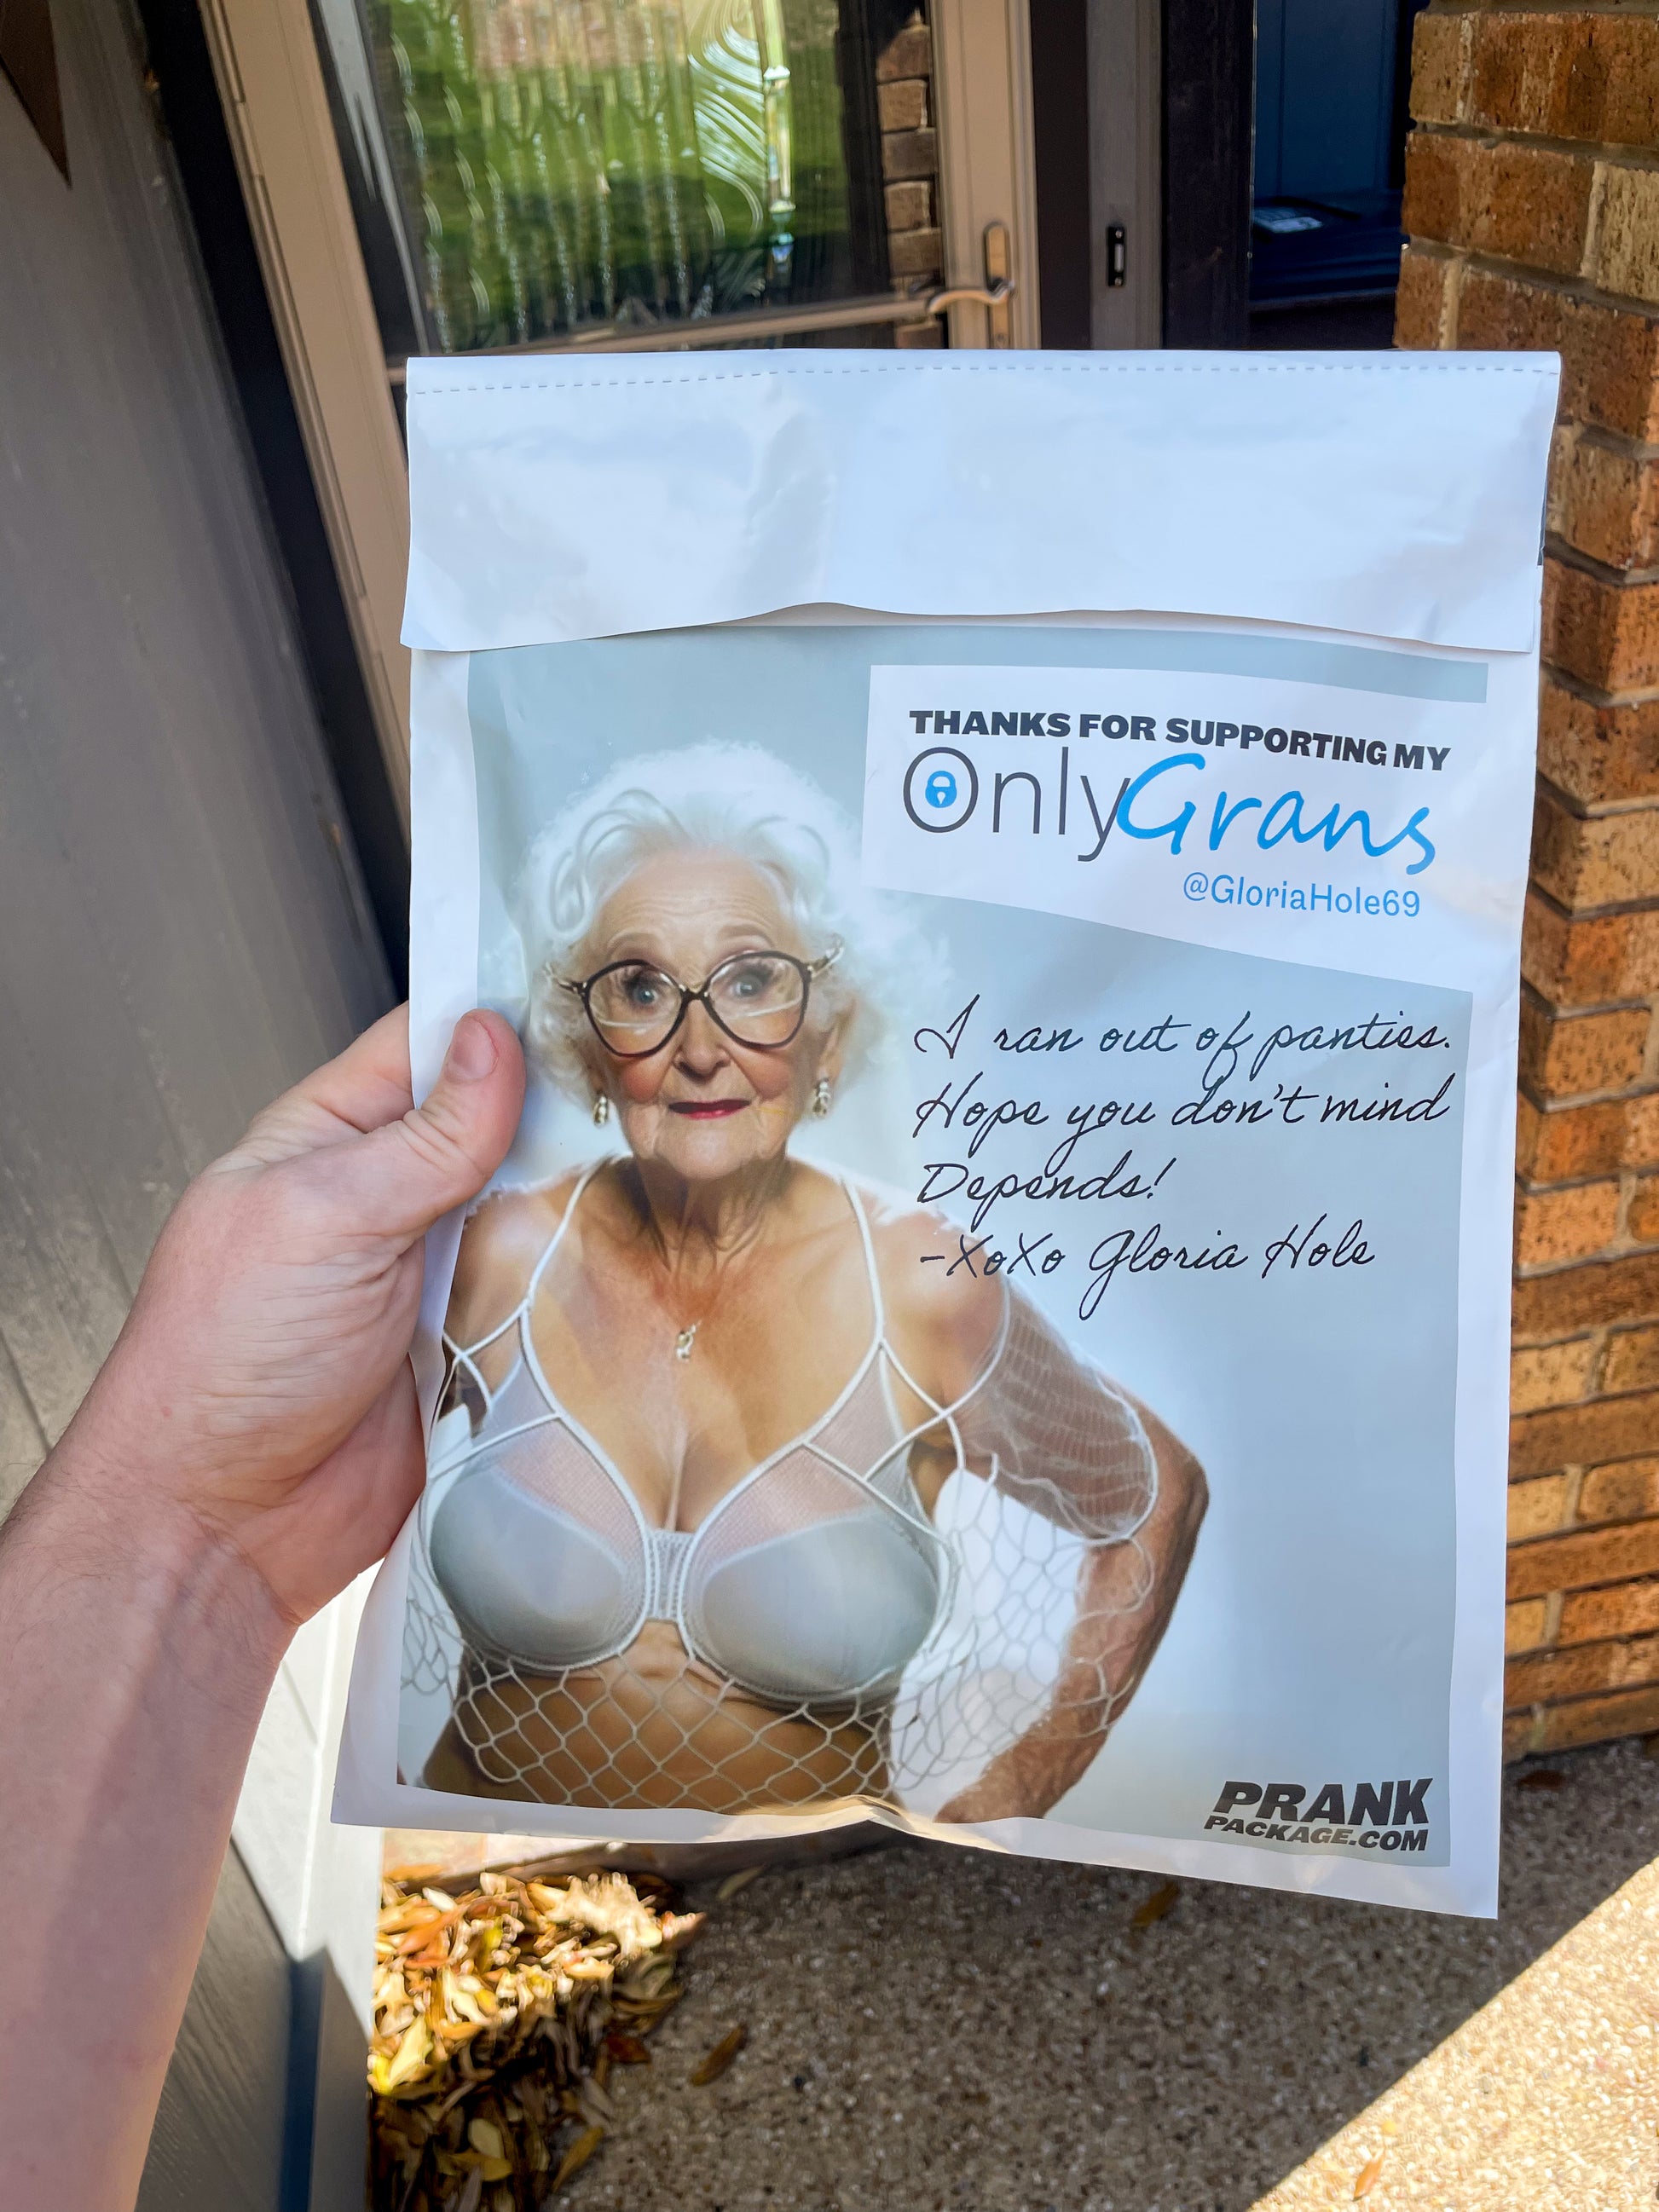 A POV shot showing the bac of the Used Granny Panties prank mailer. "Thanks for supporting my OnlyGrans" is in huge text across the back of the package.